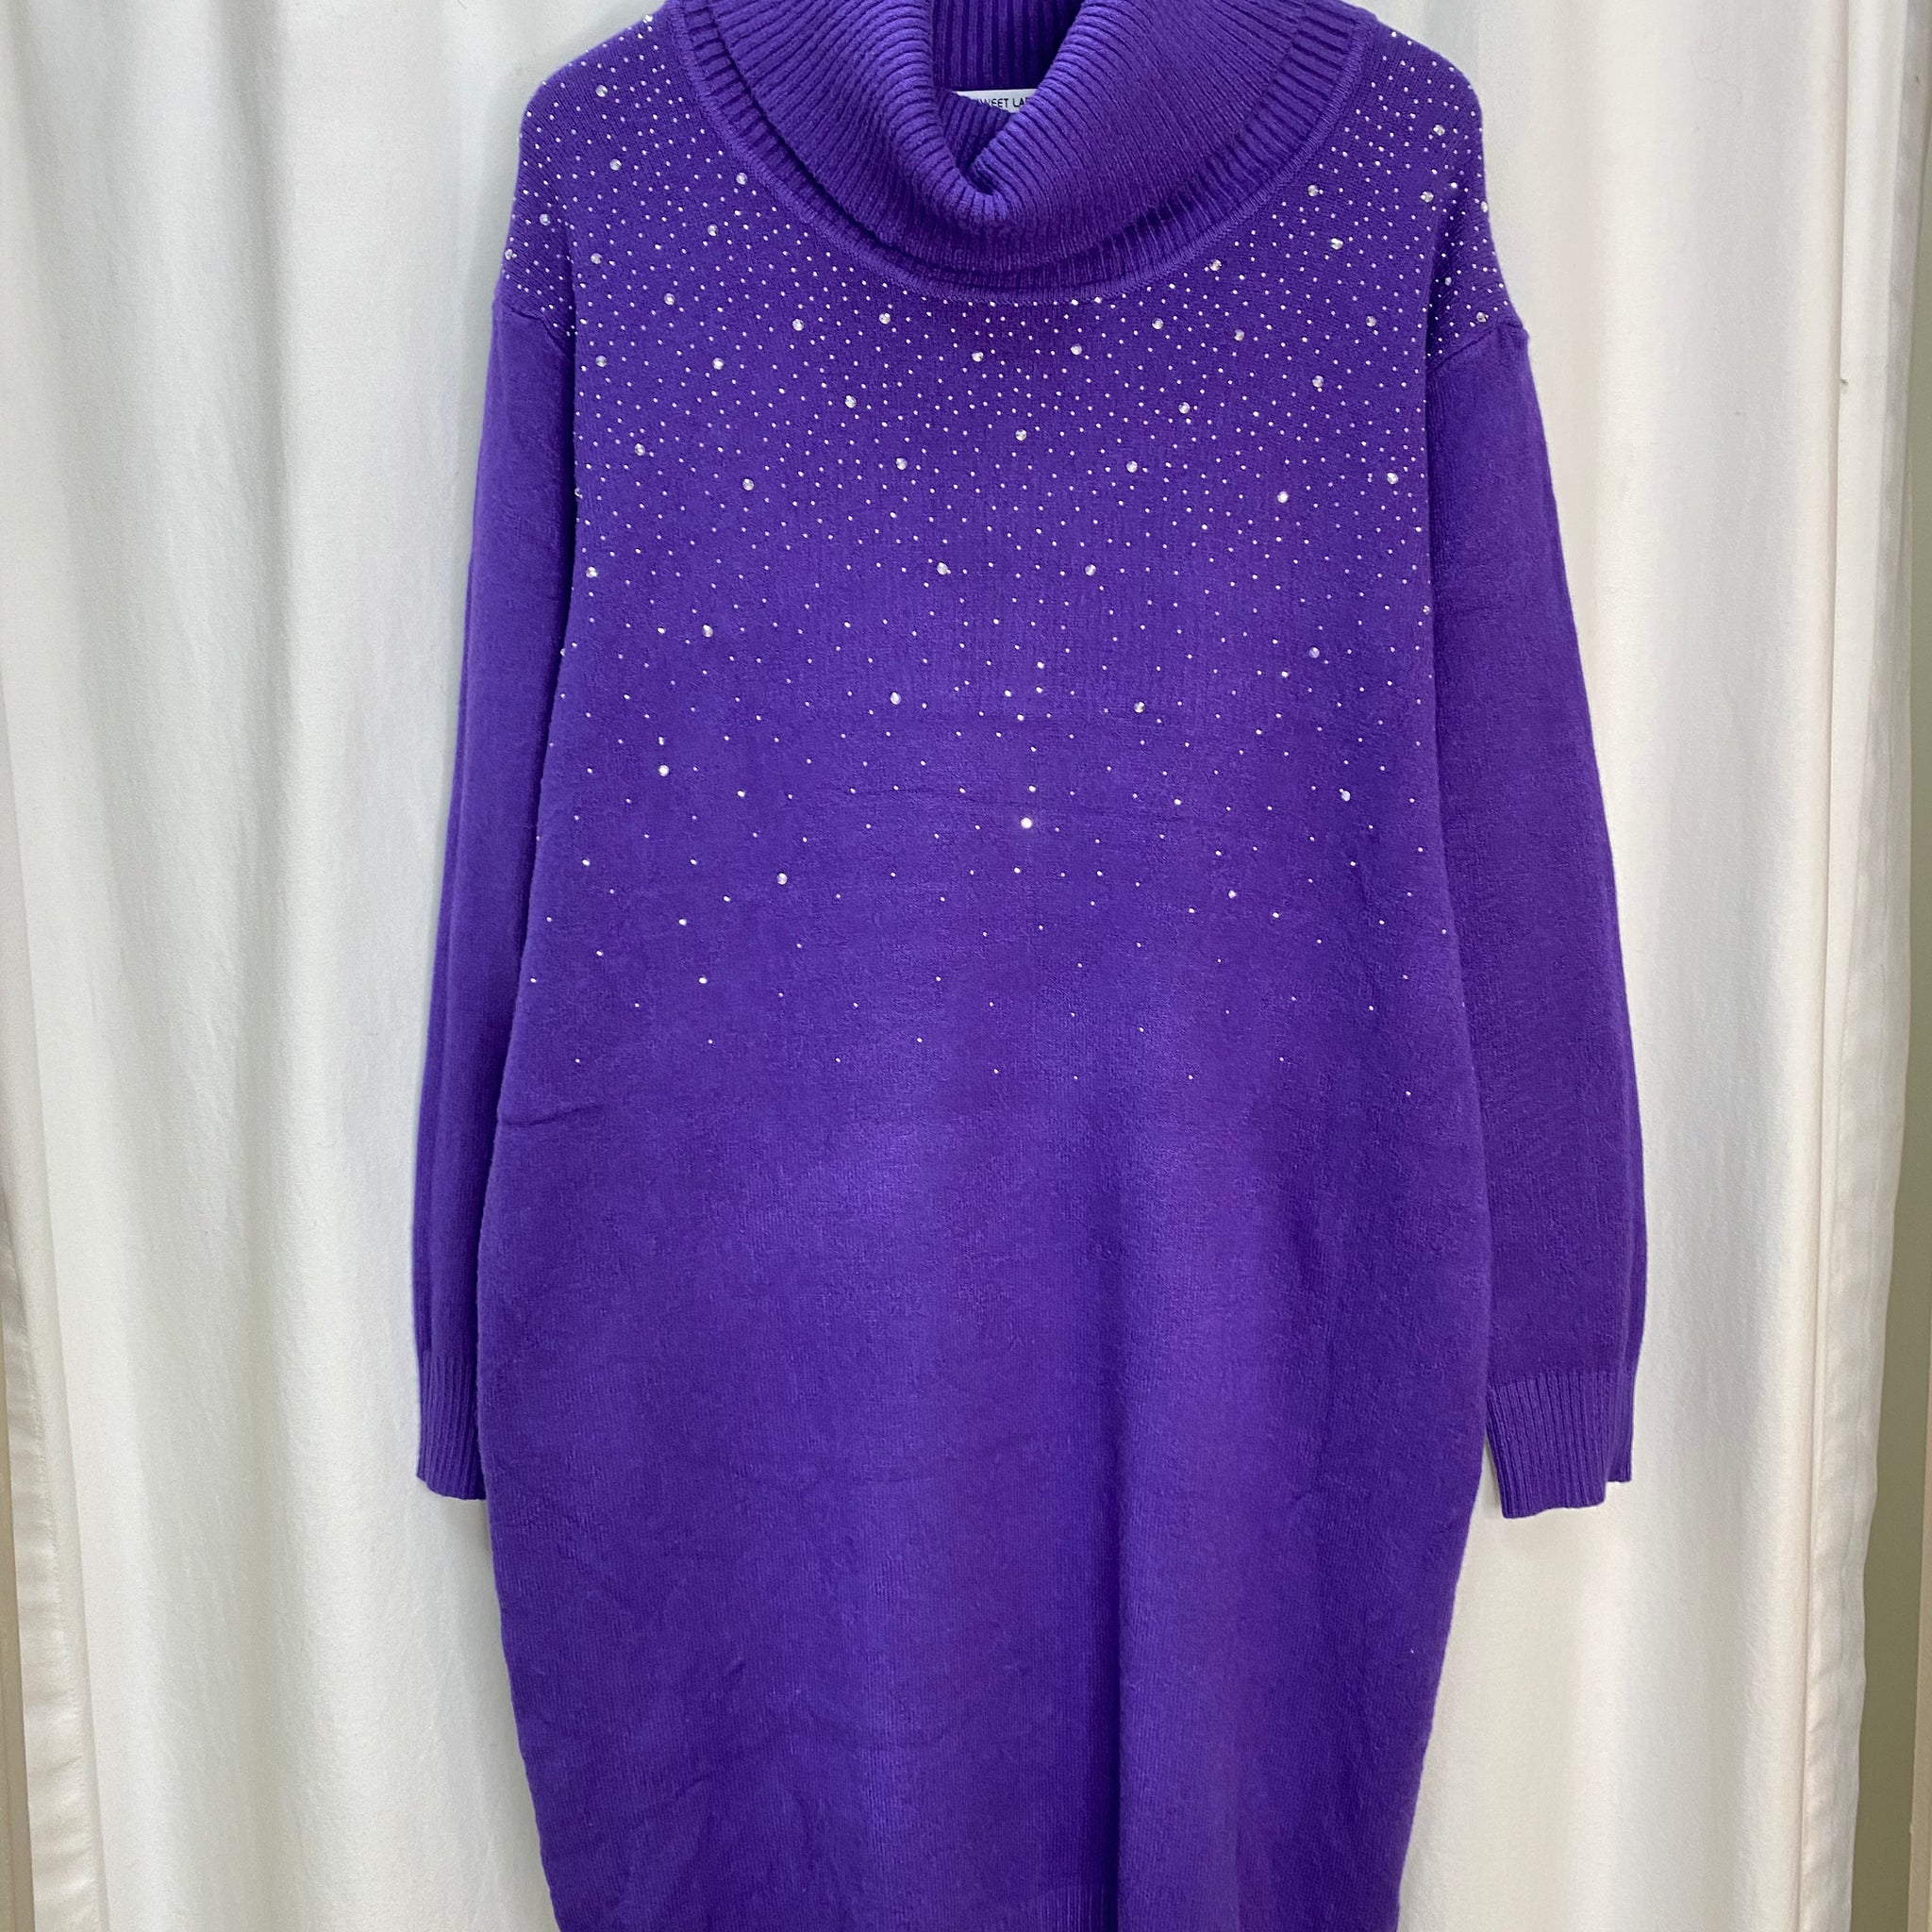 Knitted dress with rhinestones